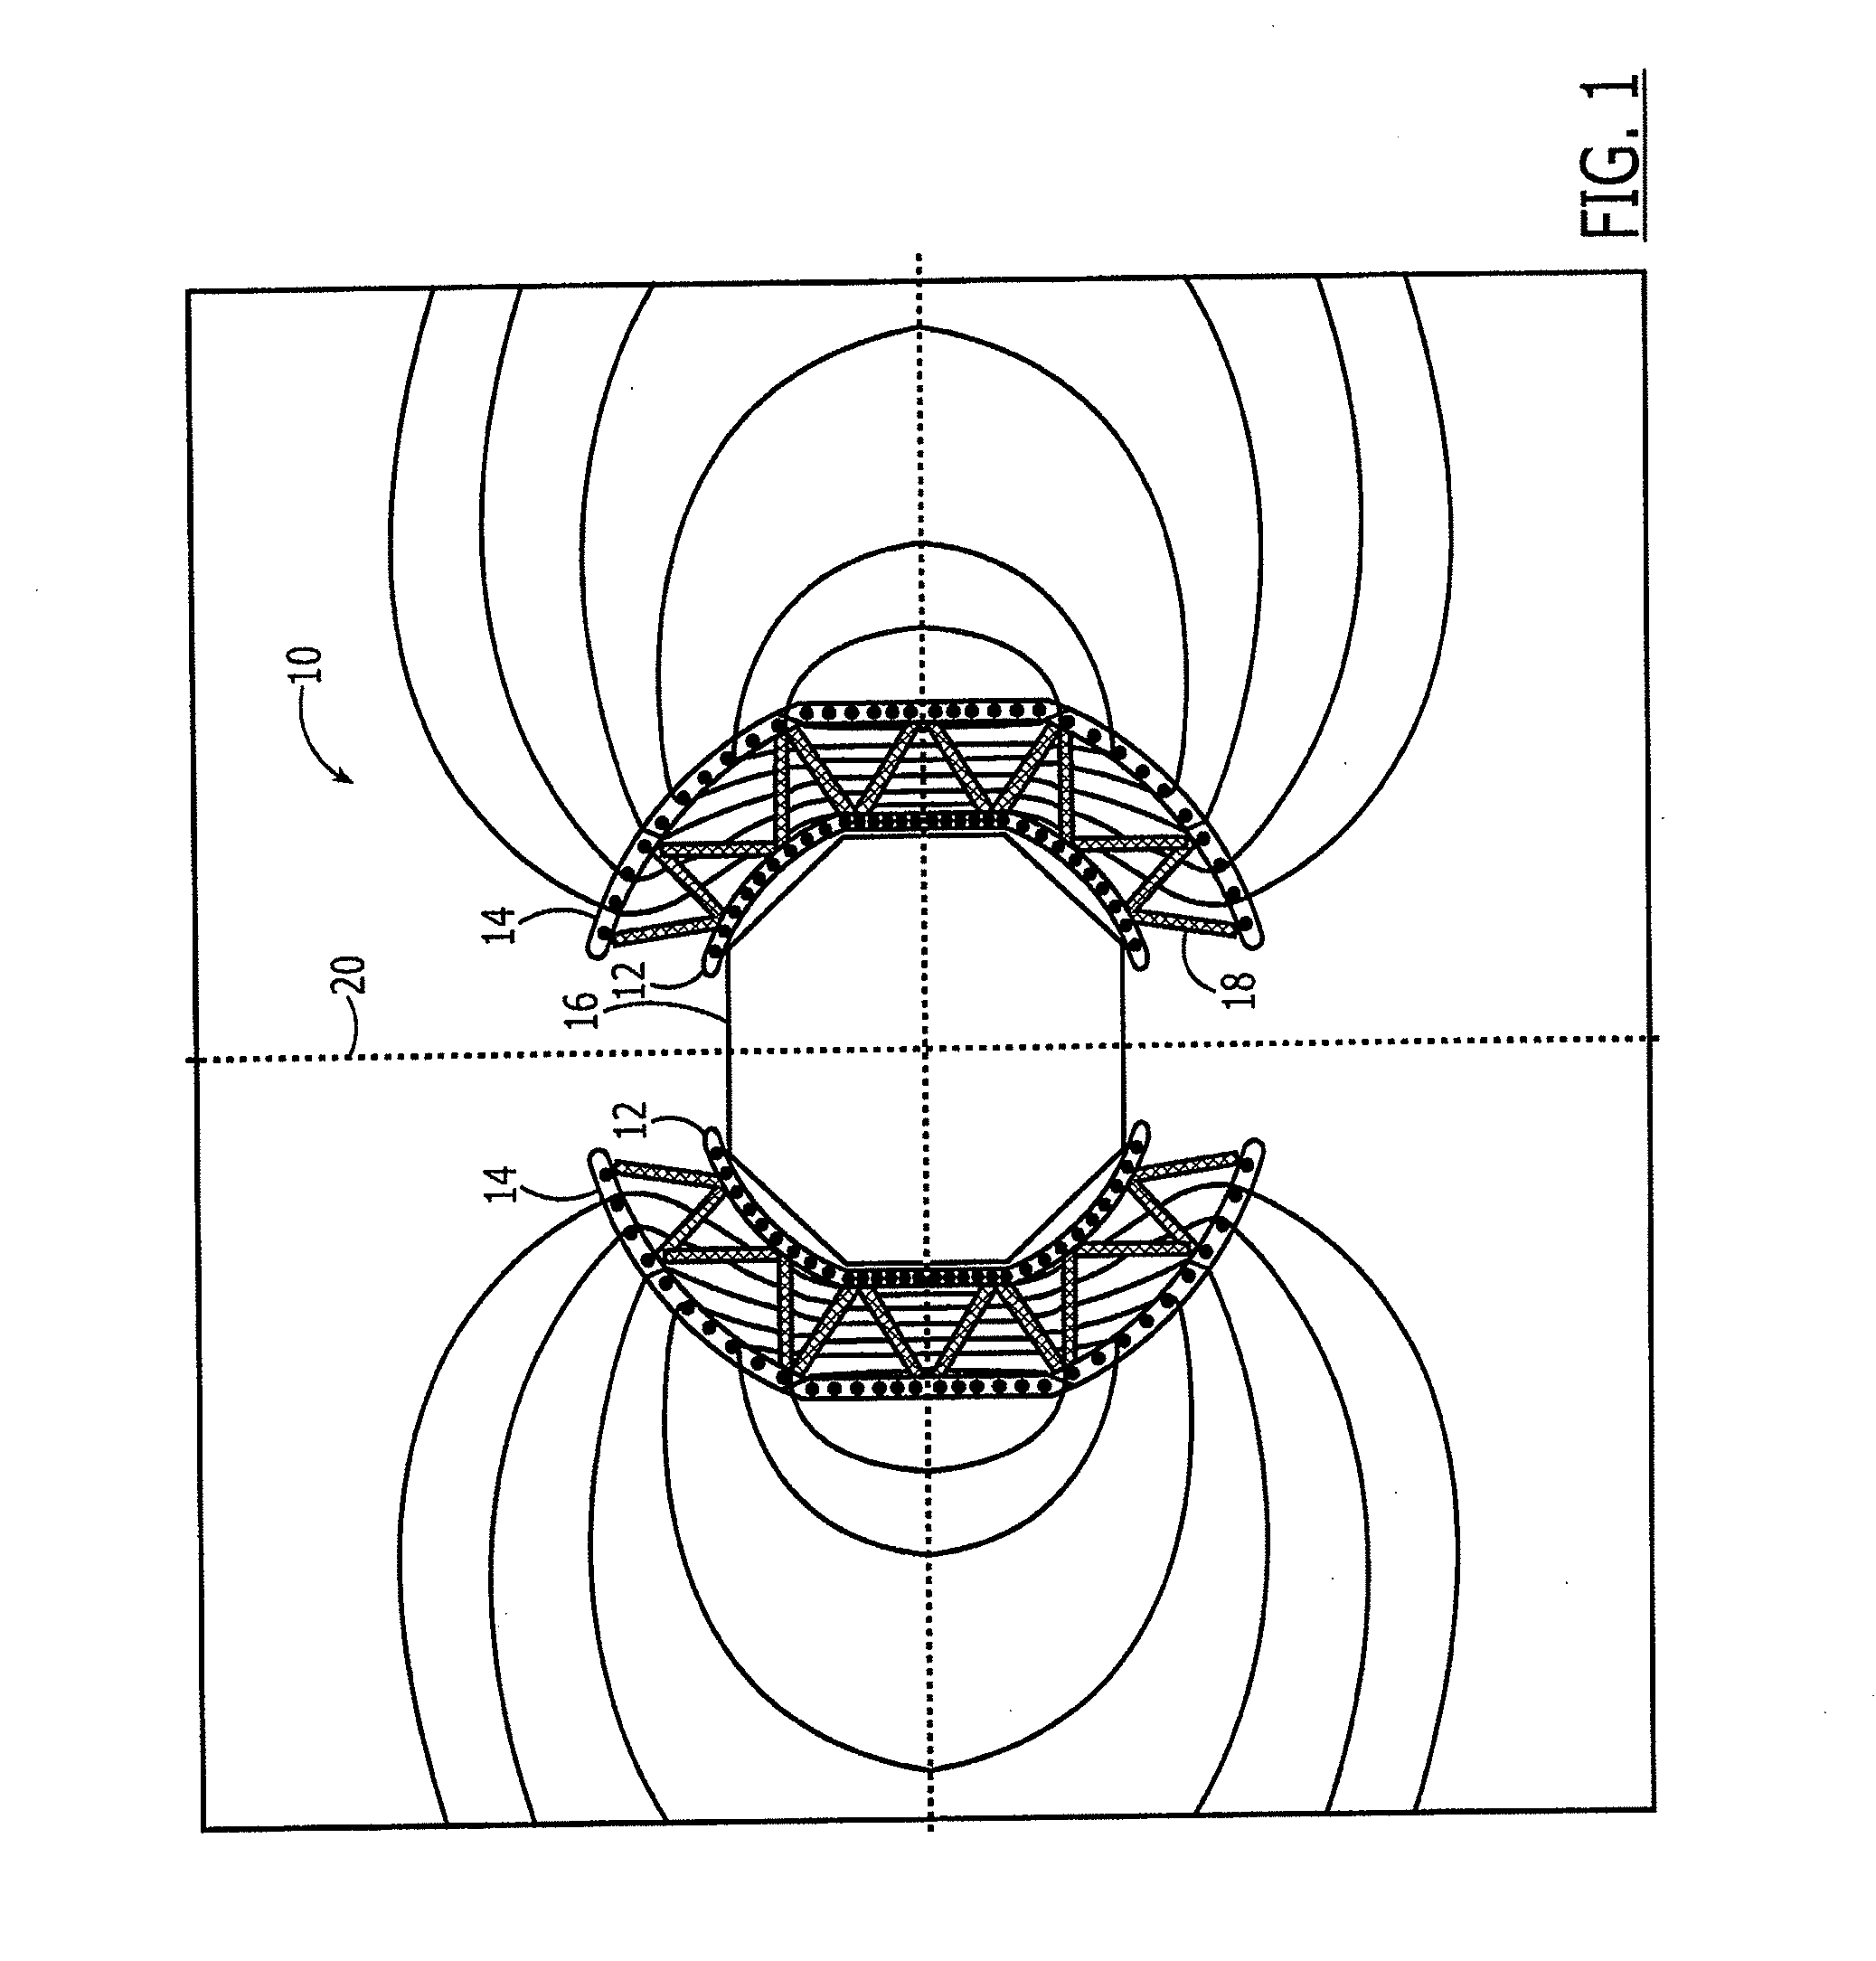 Cryogenically cooled radiation shield device and associated method